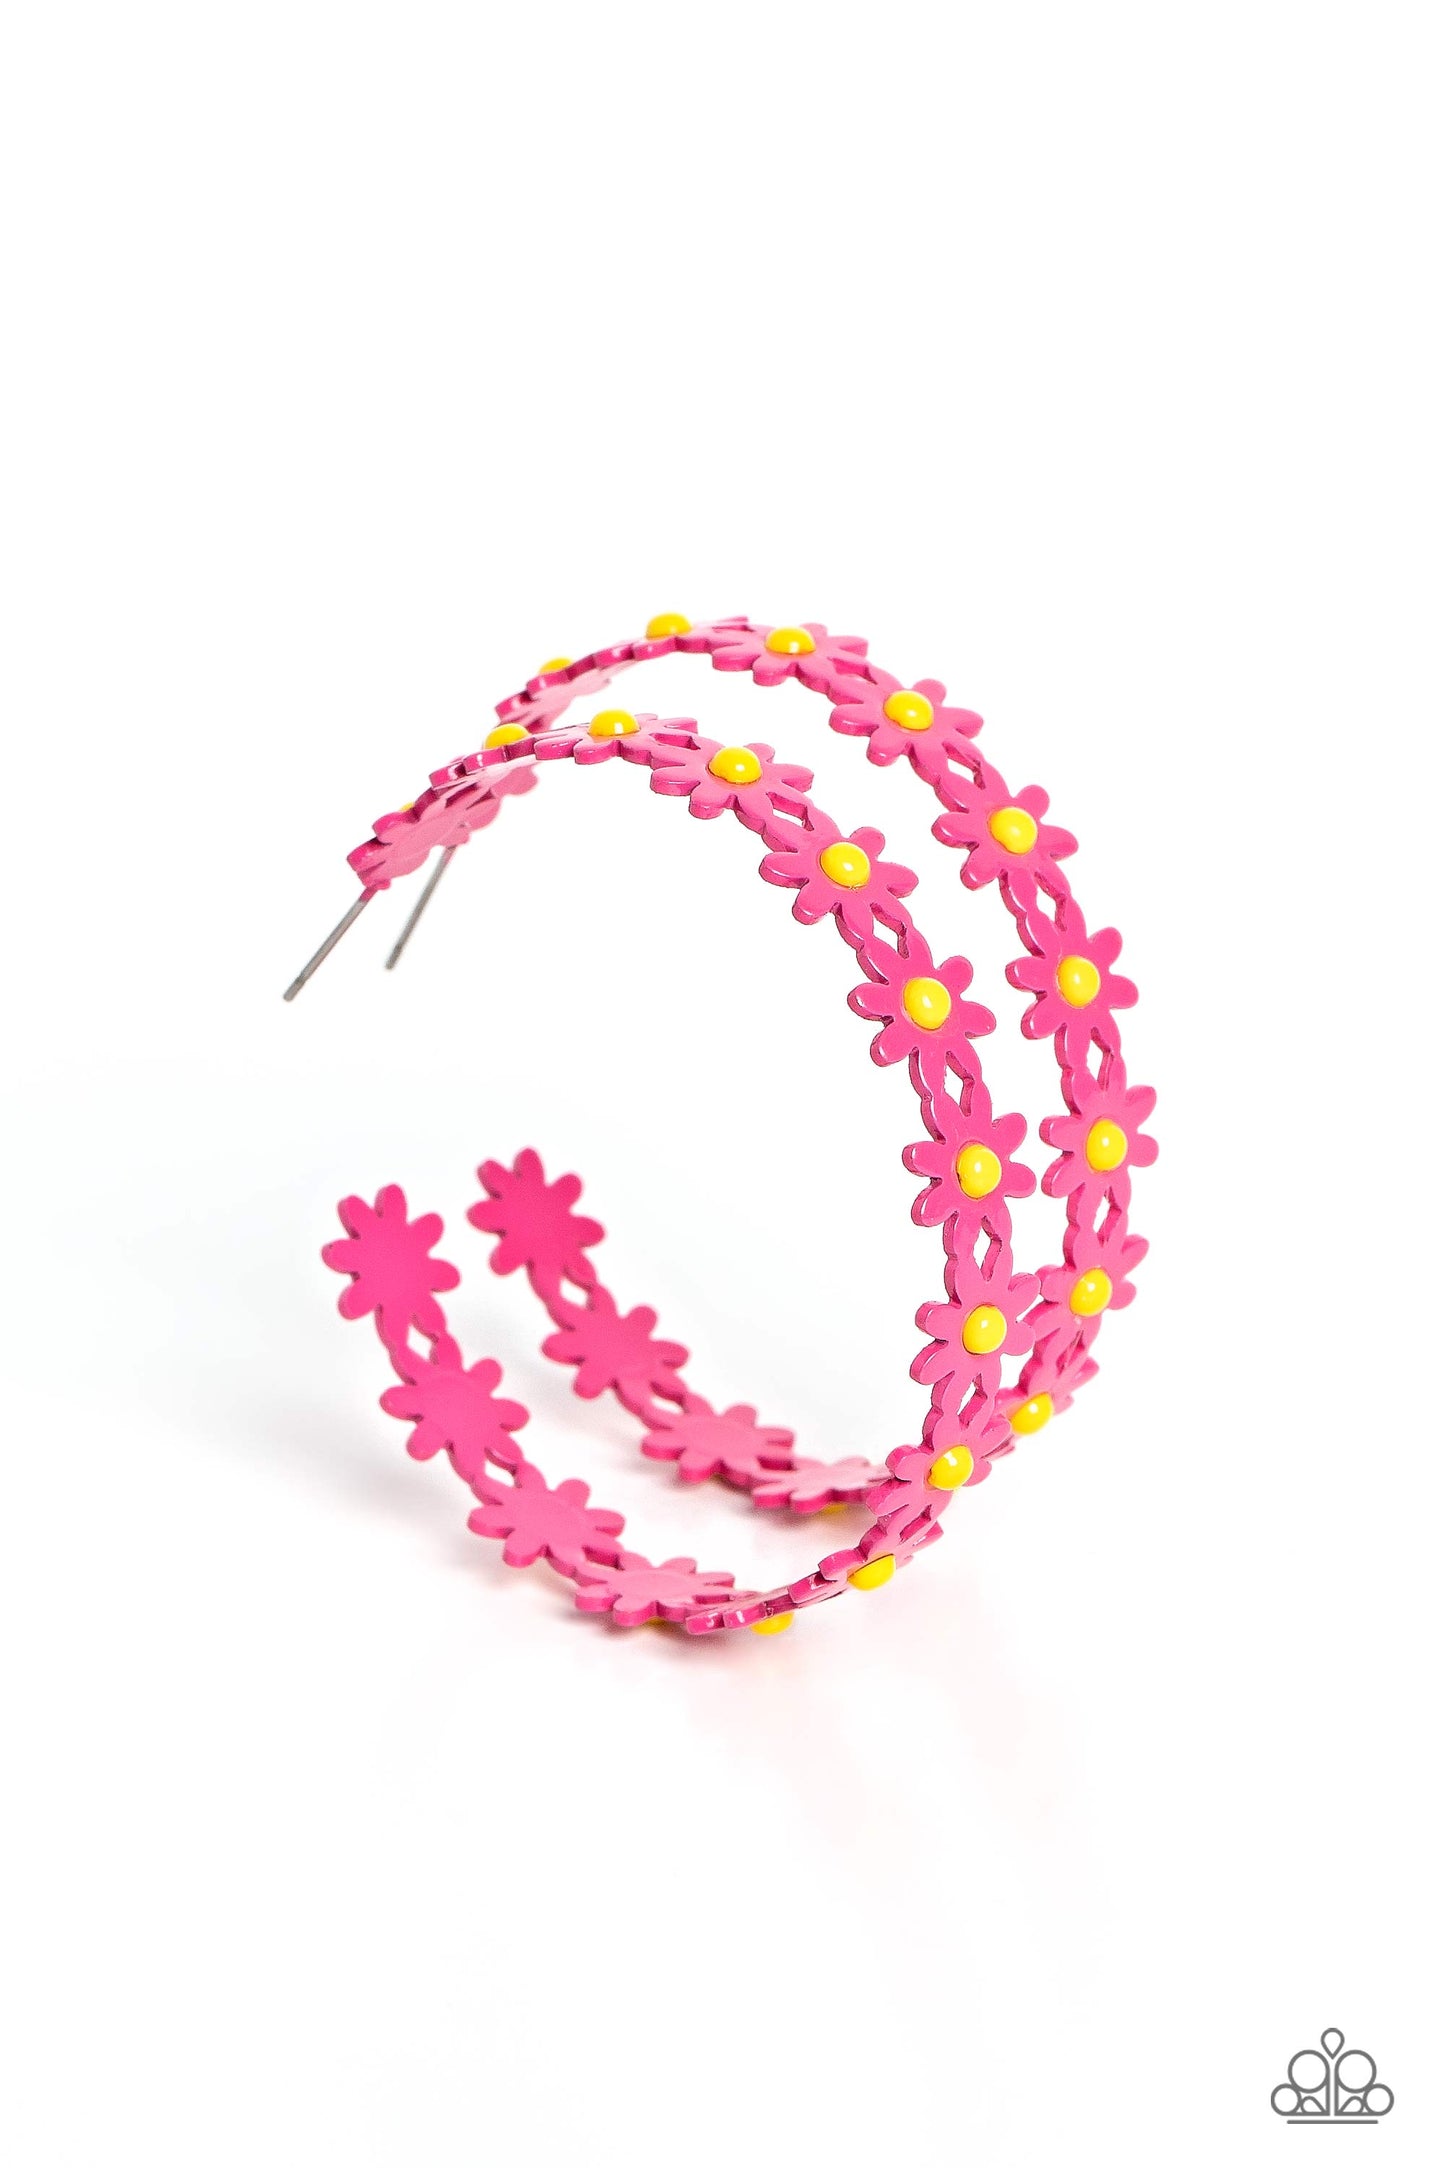 Paparazzi Accessories - Daisy Disposition - Pink Hoop Earrings a dainty collection of hot pink daisies with yellow centers blooms into a free-spirited hoop around the ear. Earring attaches to a standard post fitting. Hoop measures approximately 2" in diameter.  Sold as one pair of hoop earrings.